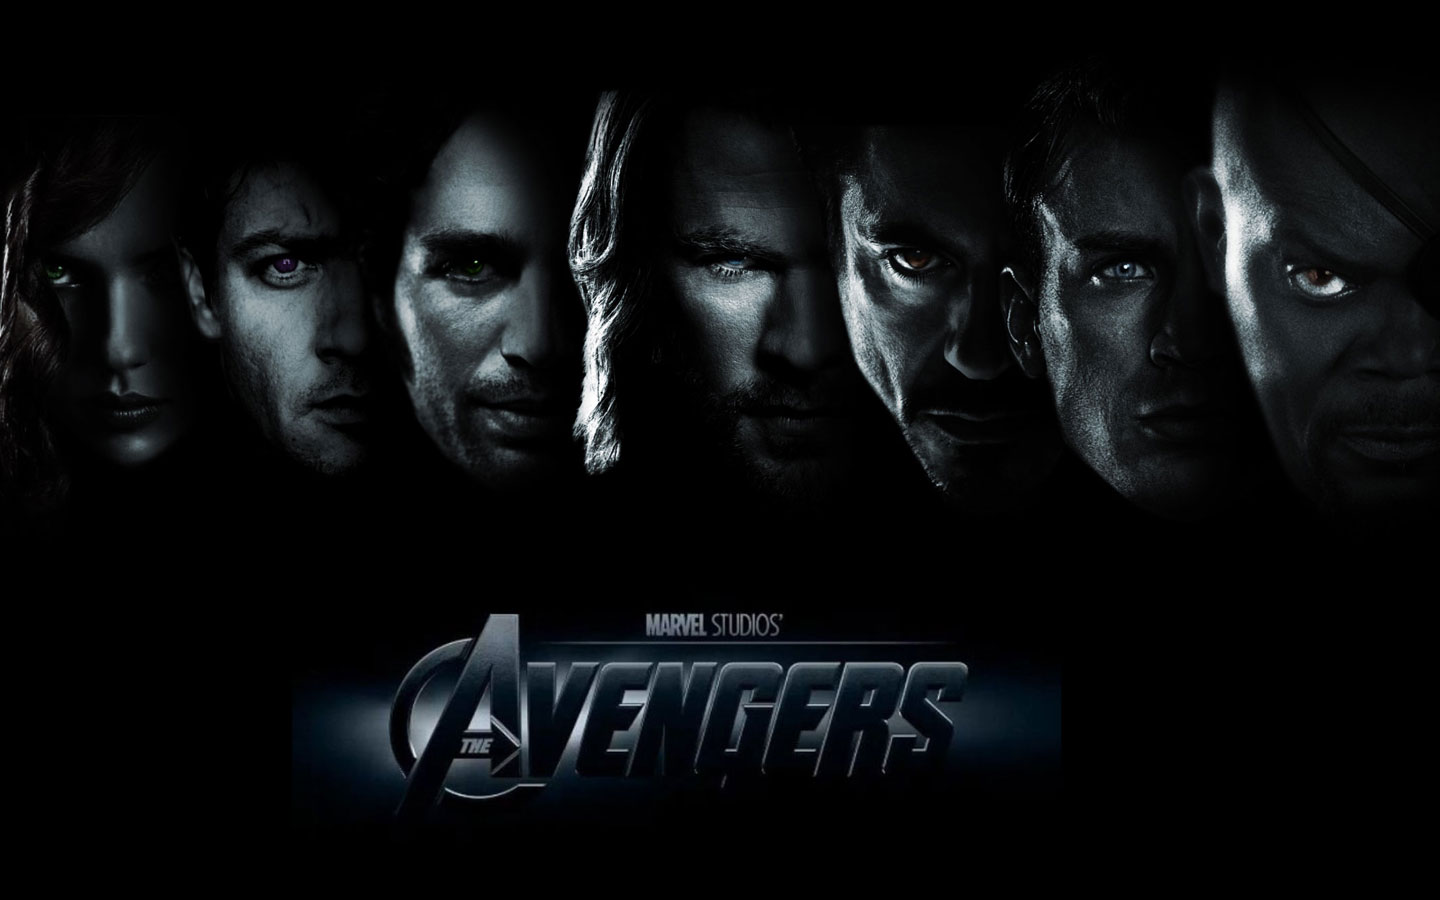 The Mojoverse: How Much of Marvel's Cinematic Universe Phase 2 Success is from Avengers?